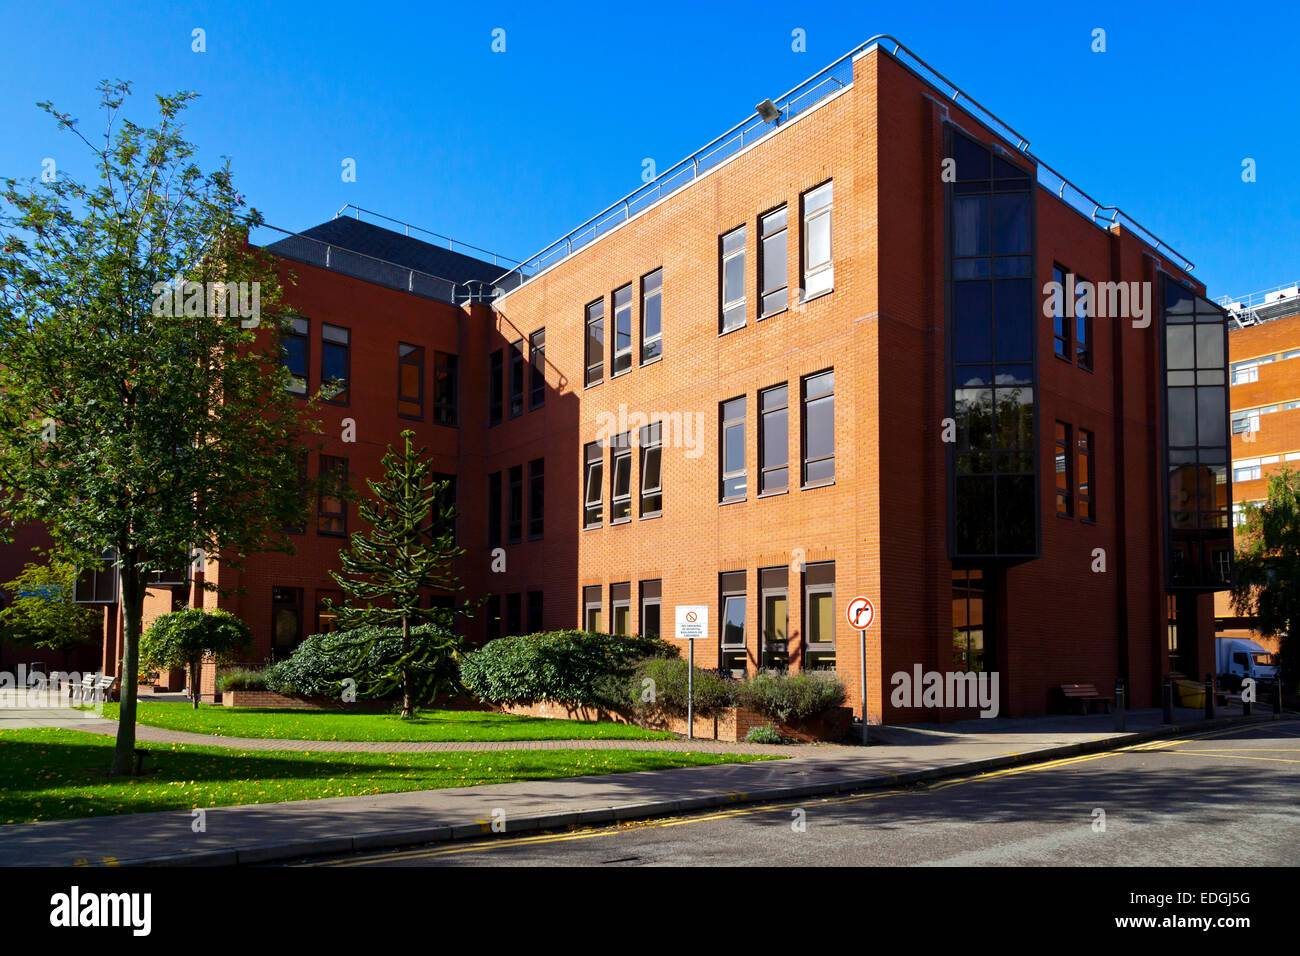 L'insegnamento di Leeds Hospitals NHS Trust ospedale in Leeds West Yorkshire England Regno Unito Foto Stock